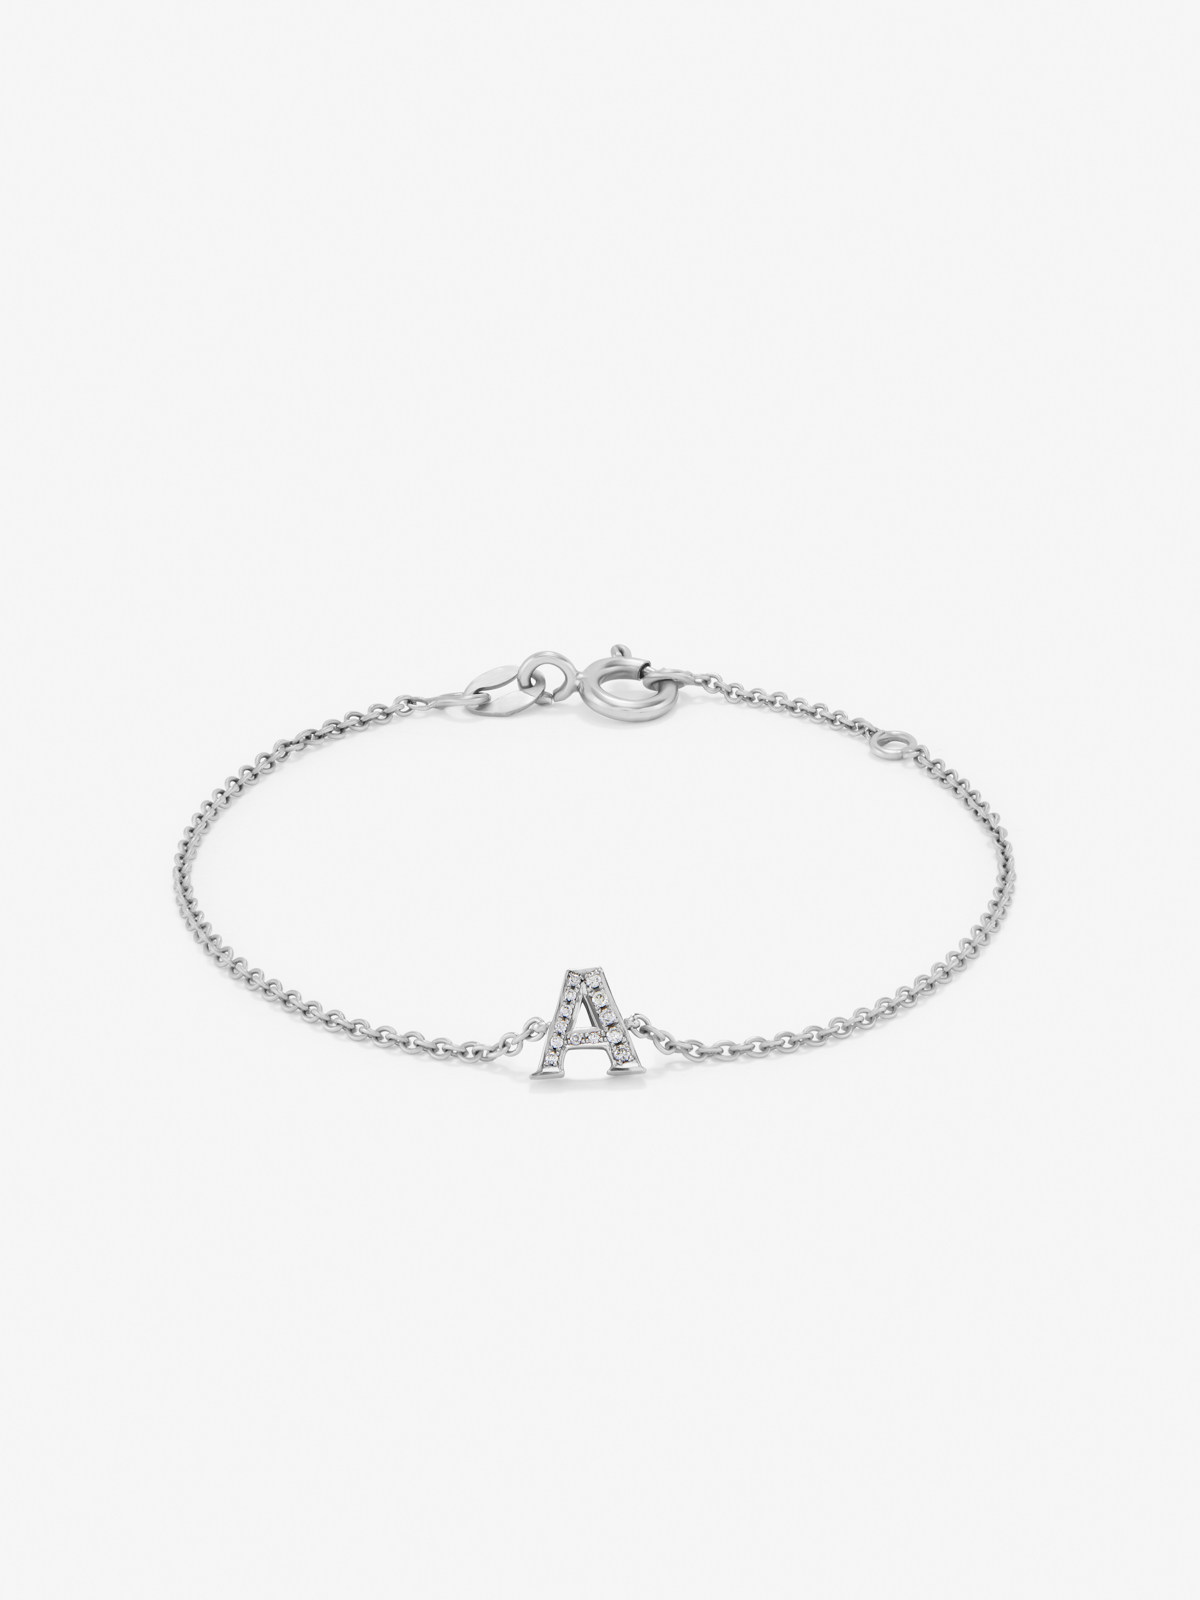 18K White Gold Chain Bracelet with Initial and Diamonds